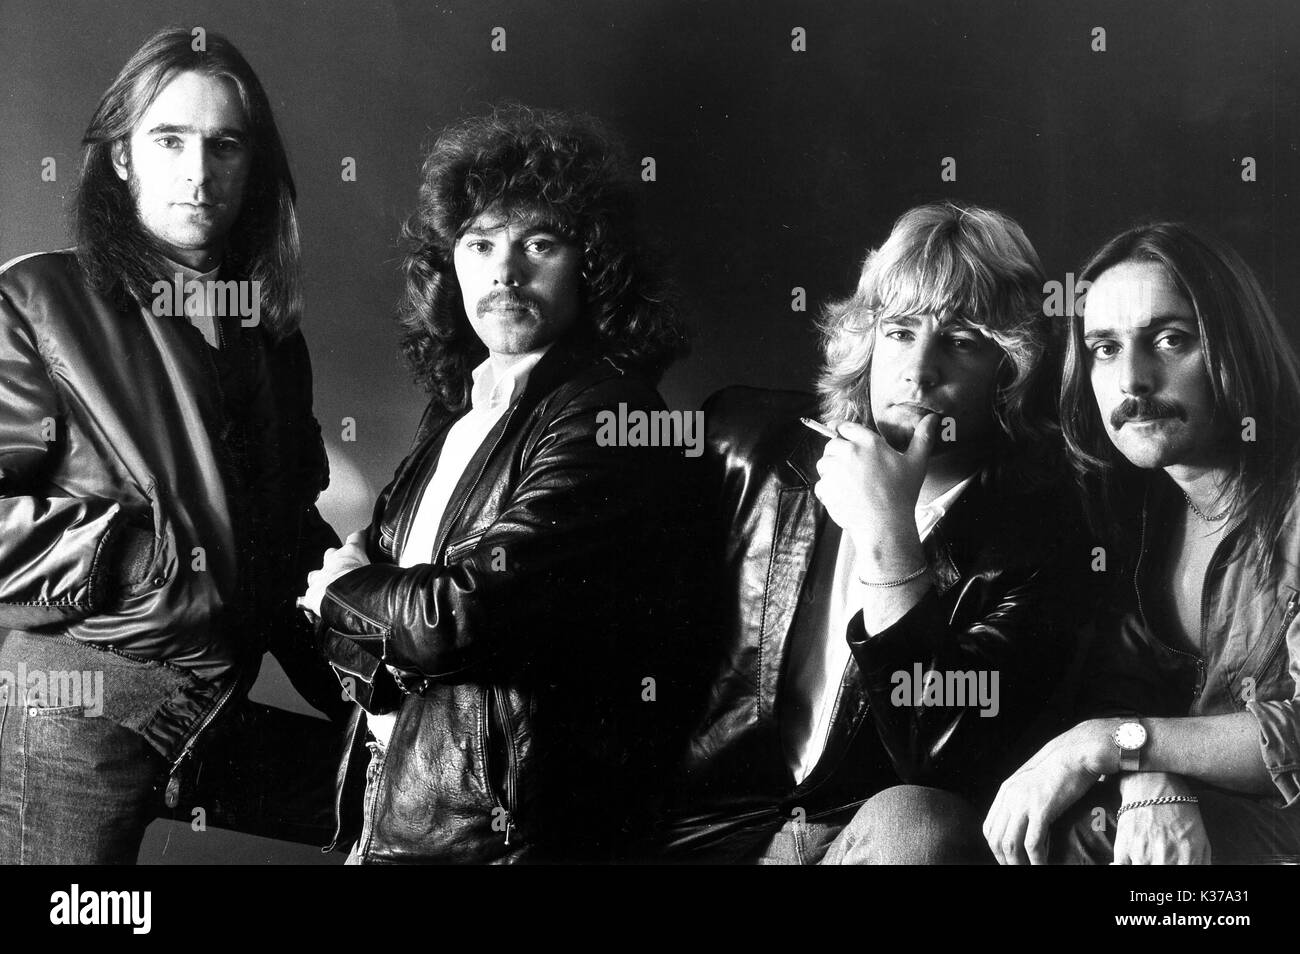 The status hi-res photography stock - quo and images Alamy